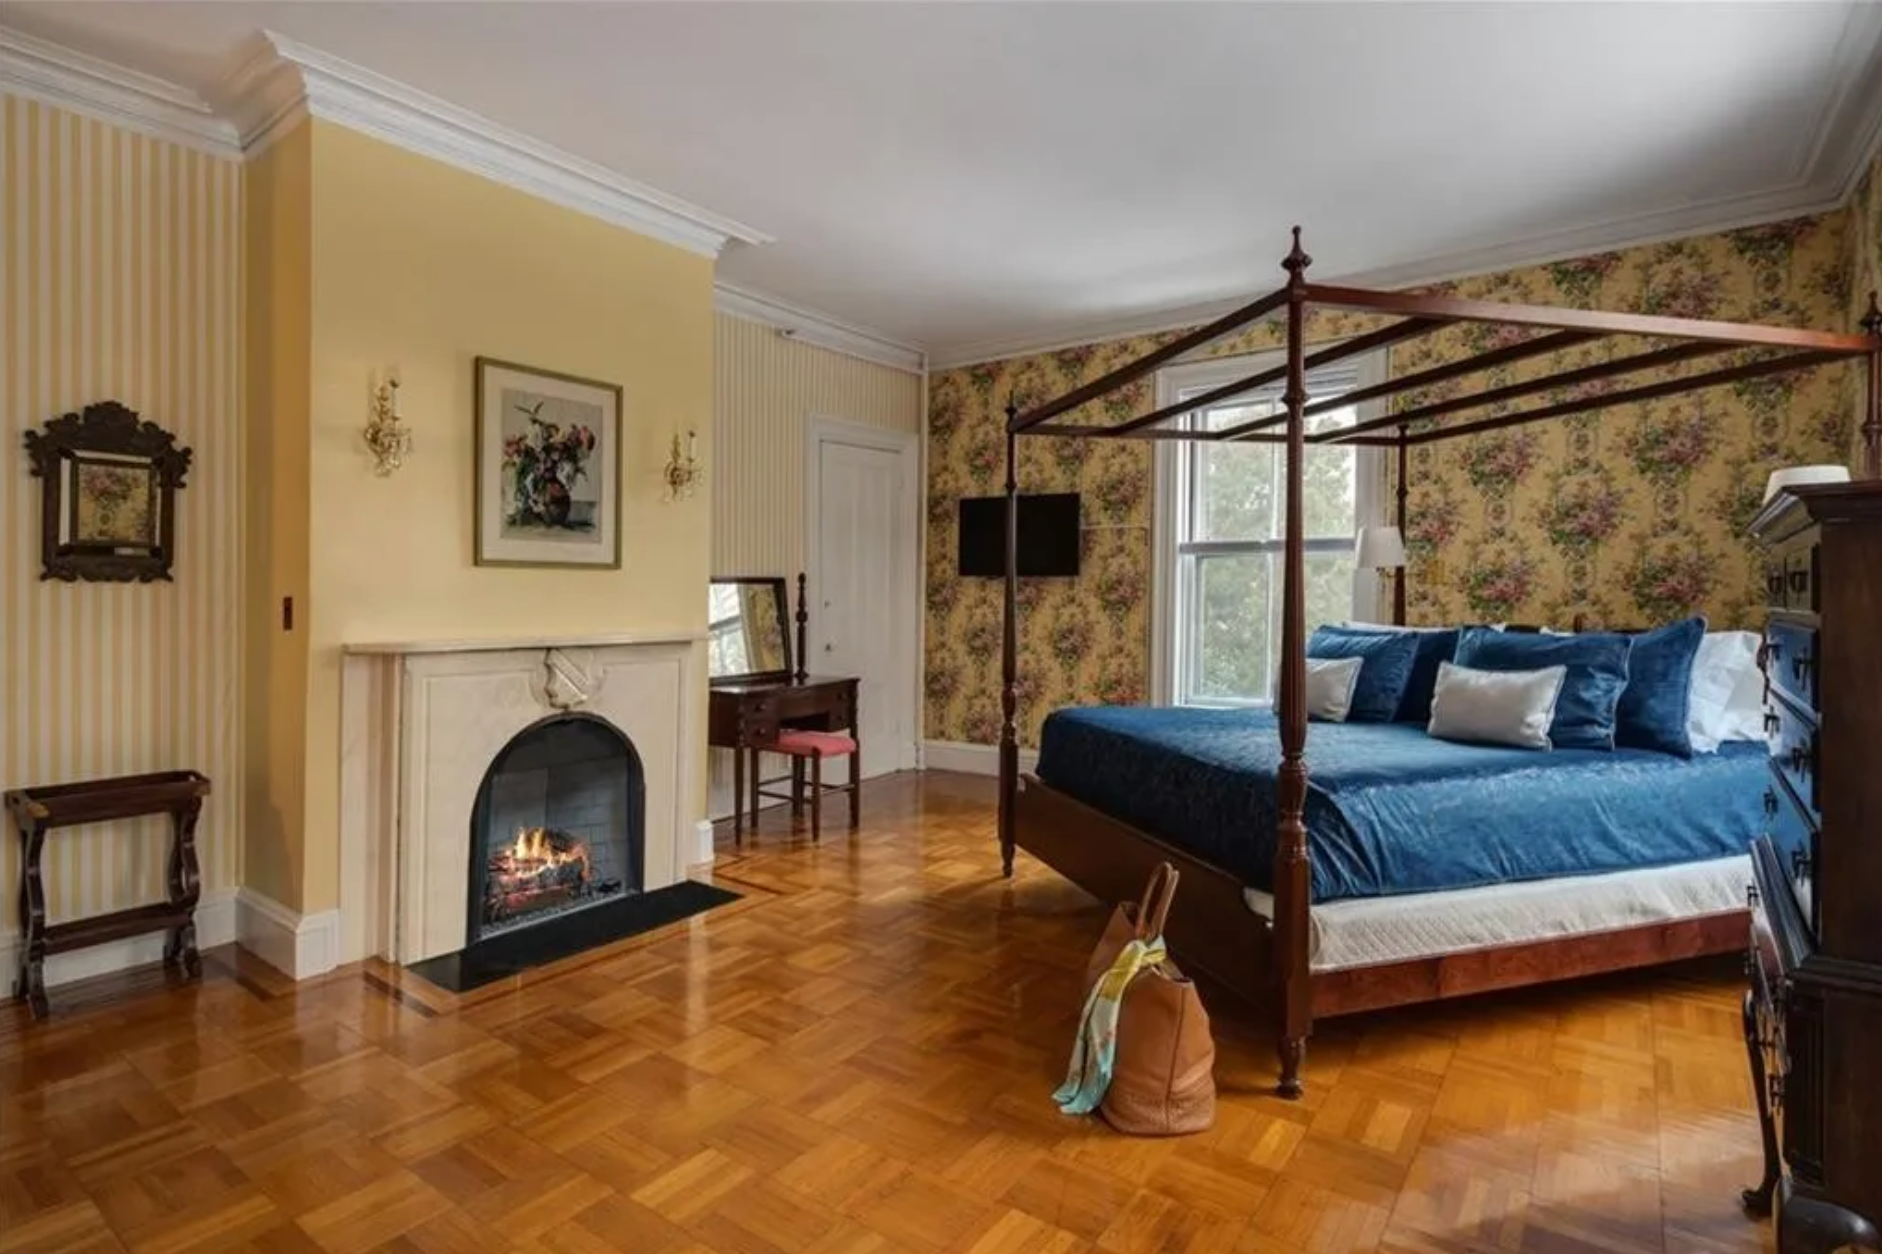 This bedroom has light yellow walls and a yellow patterned accent wall, a gas fireplace, and hardwood floors.